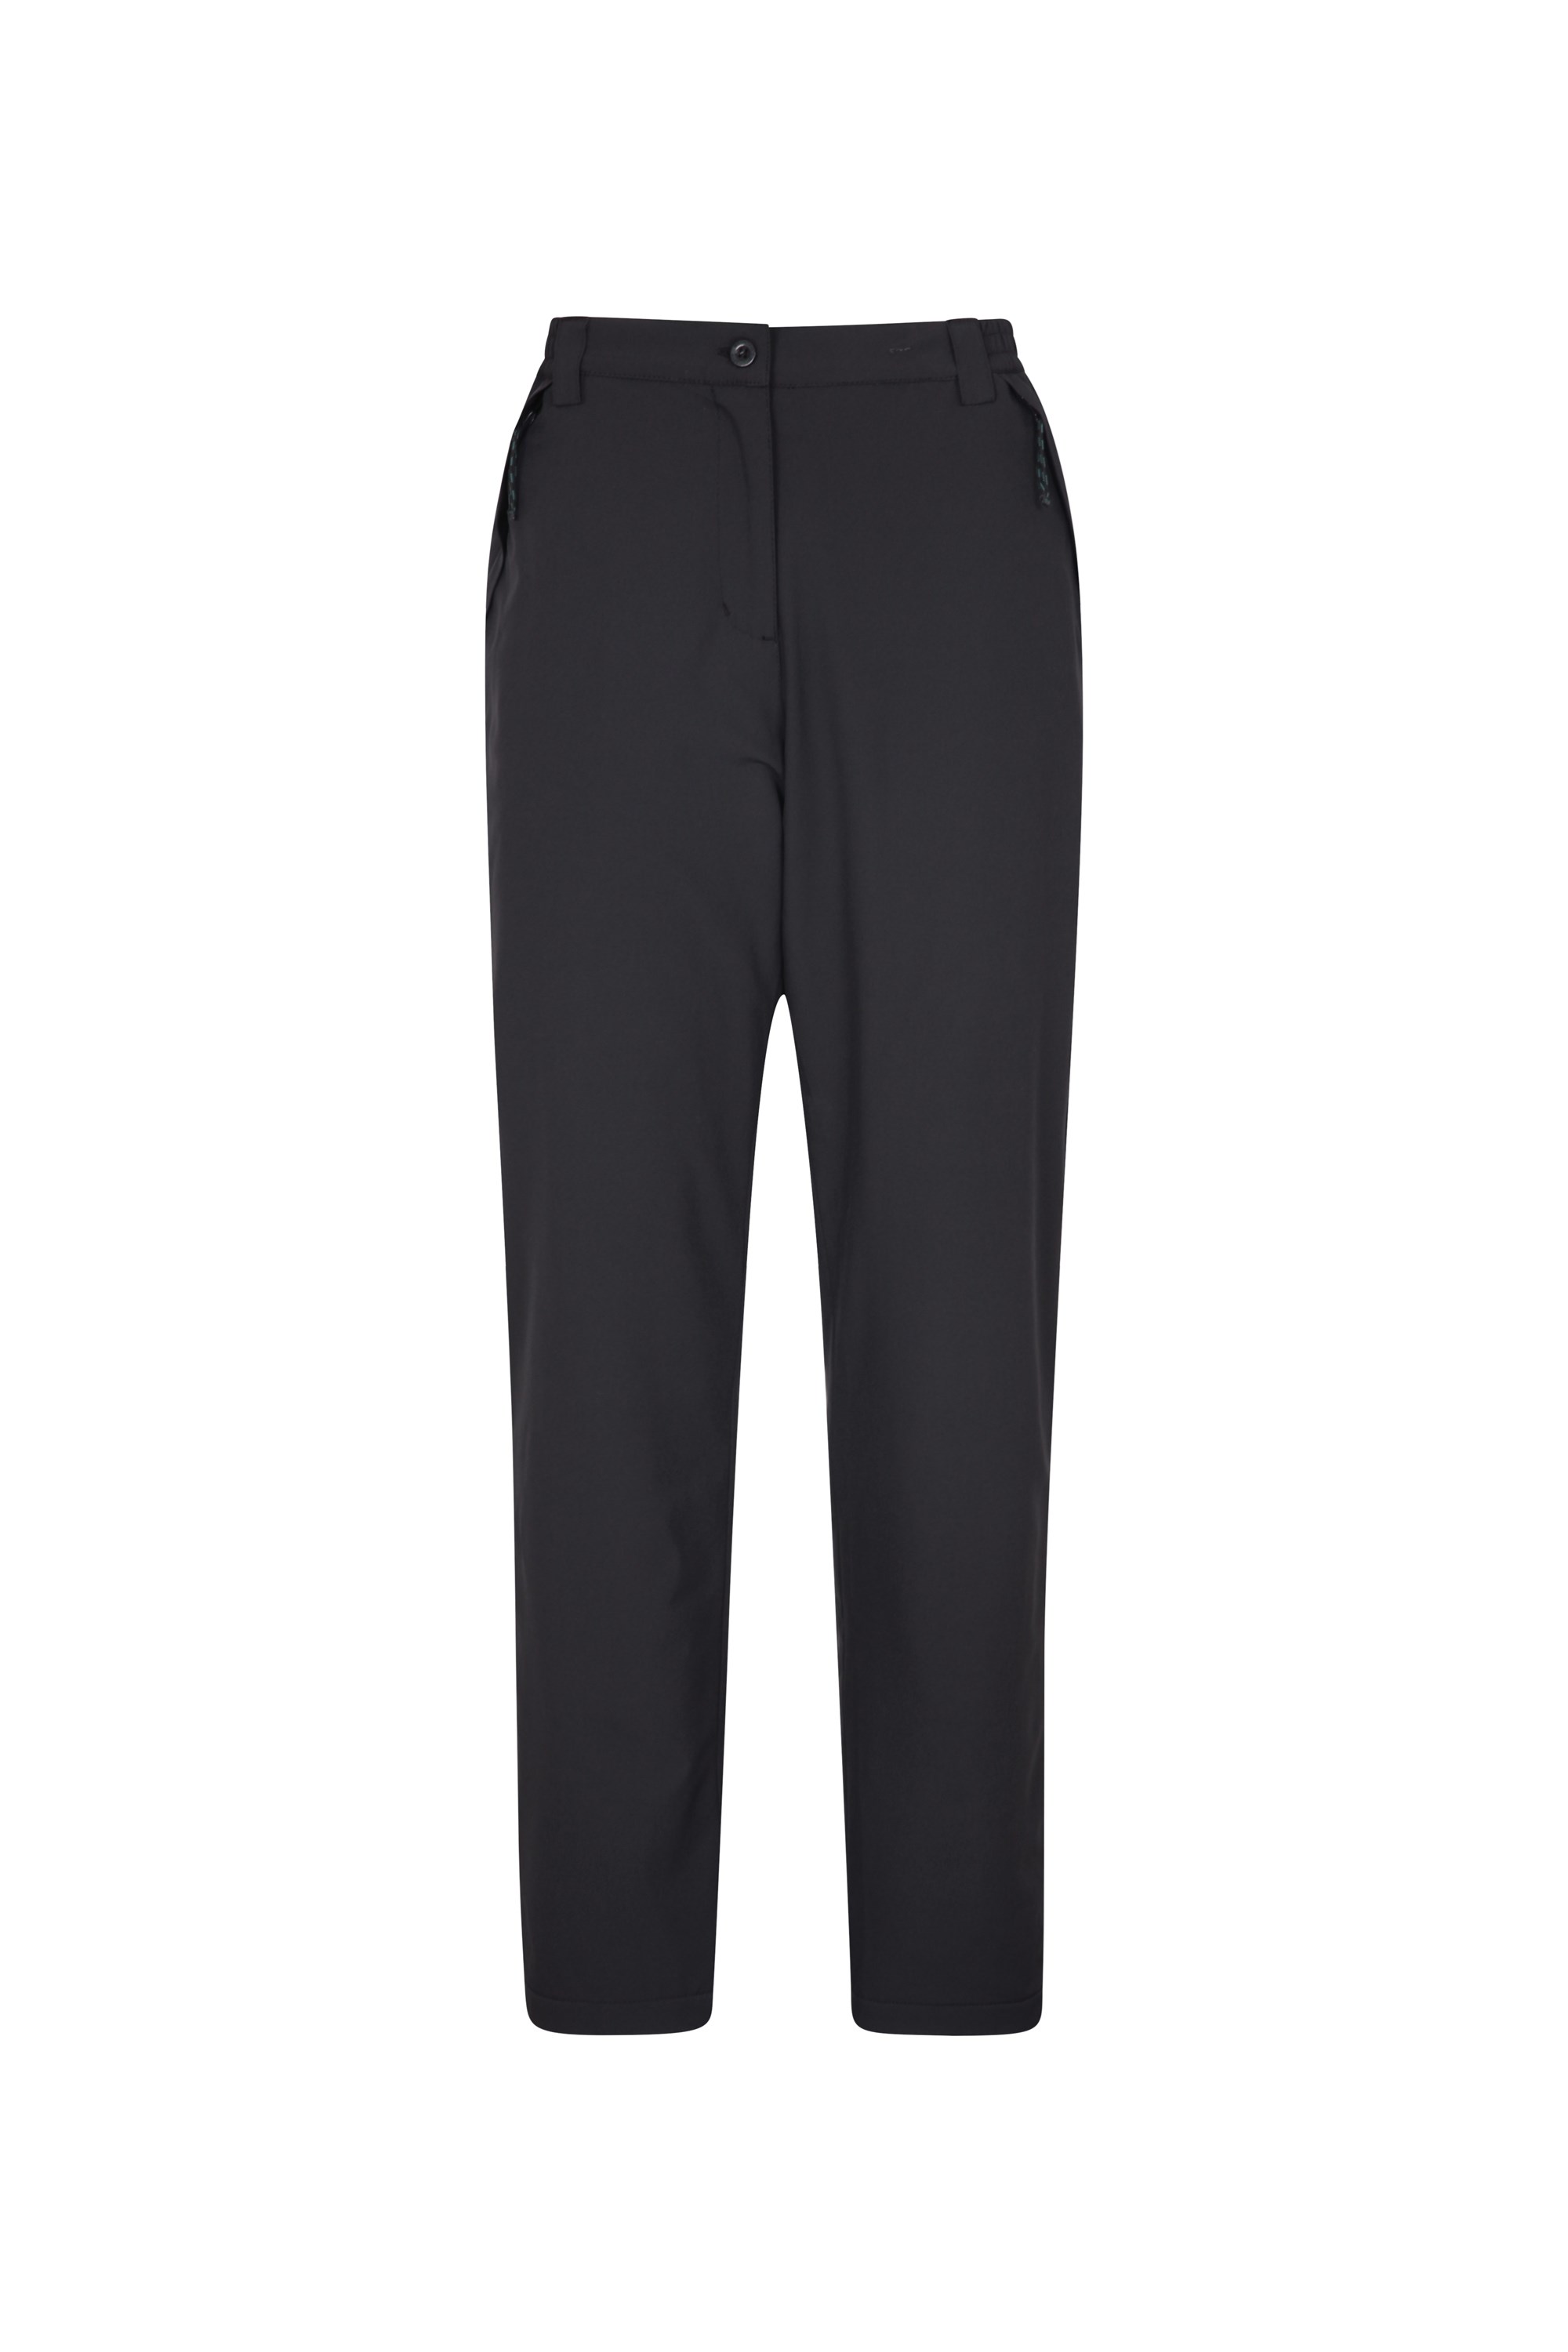 Fleece-lined jeans: High-waisted trousers that keep you warm | The  Independent